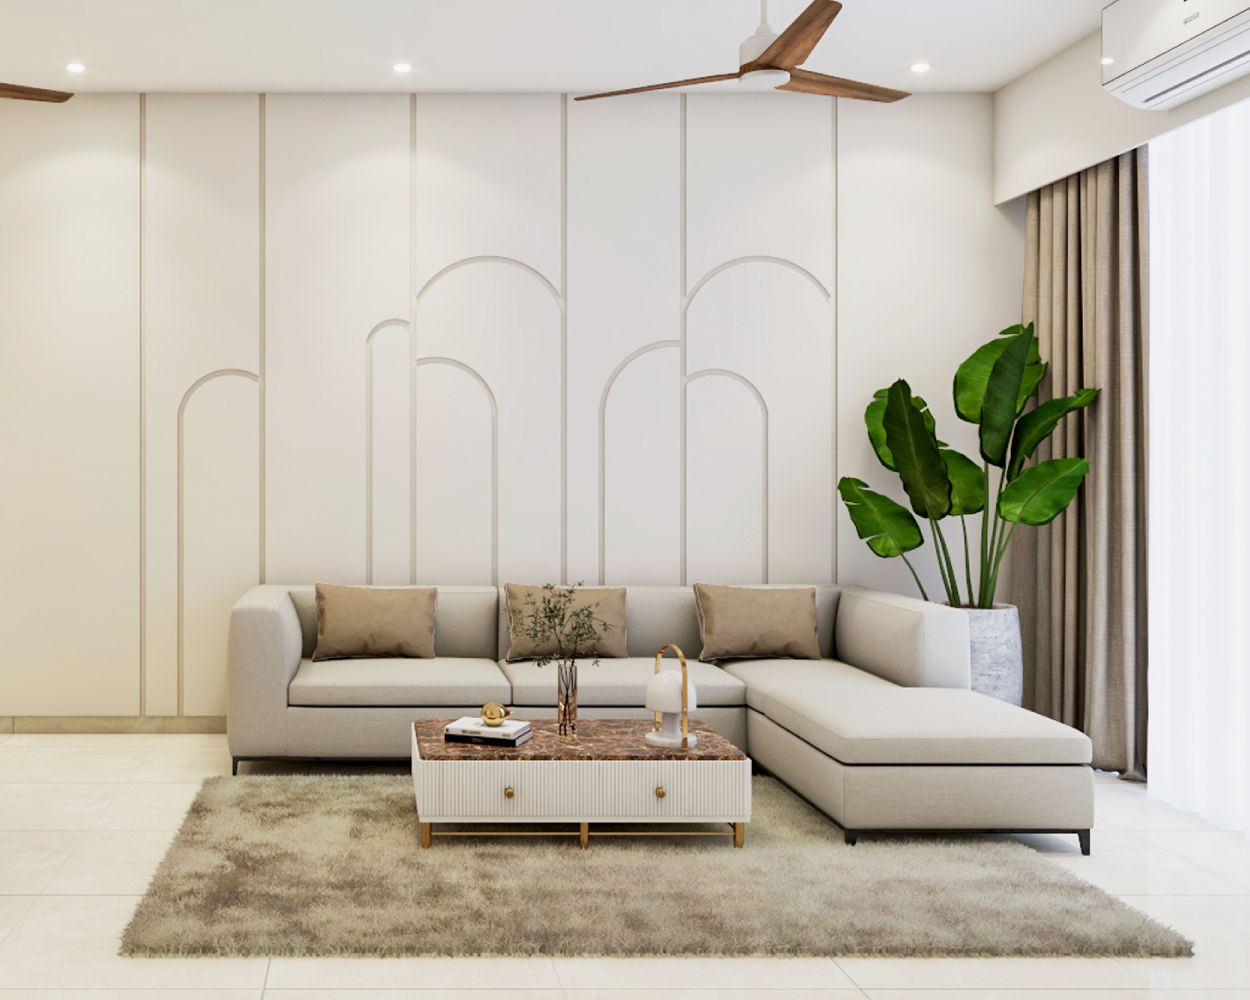 Contemporary Living Room Design With Beige L-Shaped Sectional And Wall Design With Arched Grooves